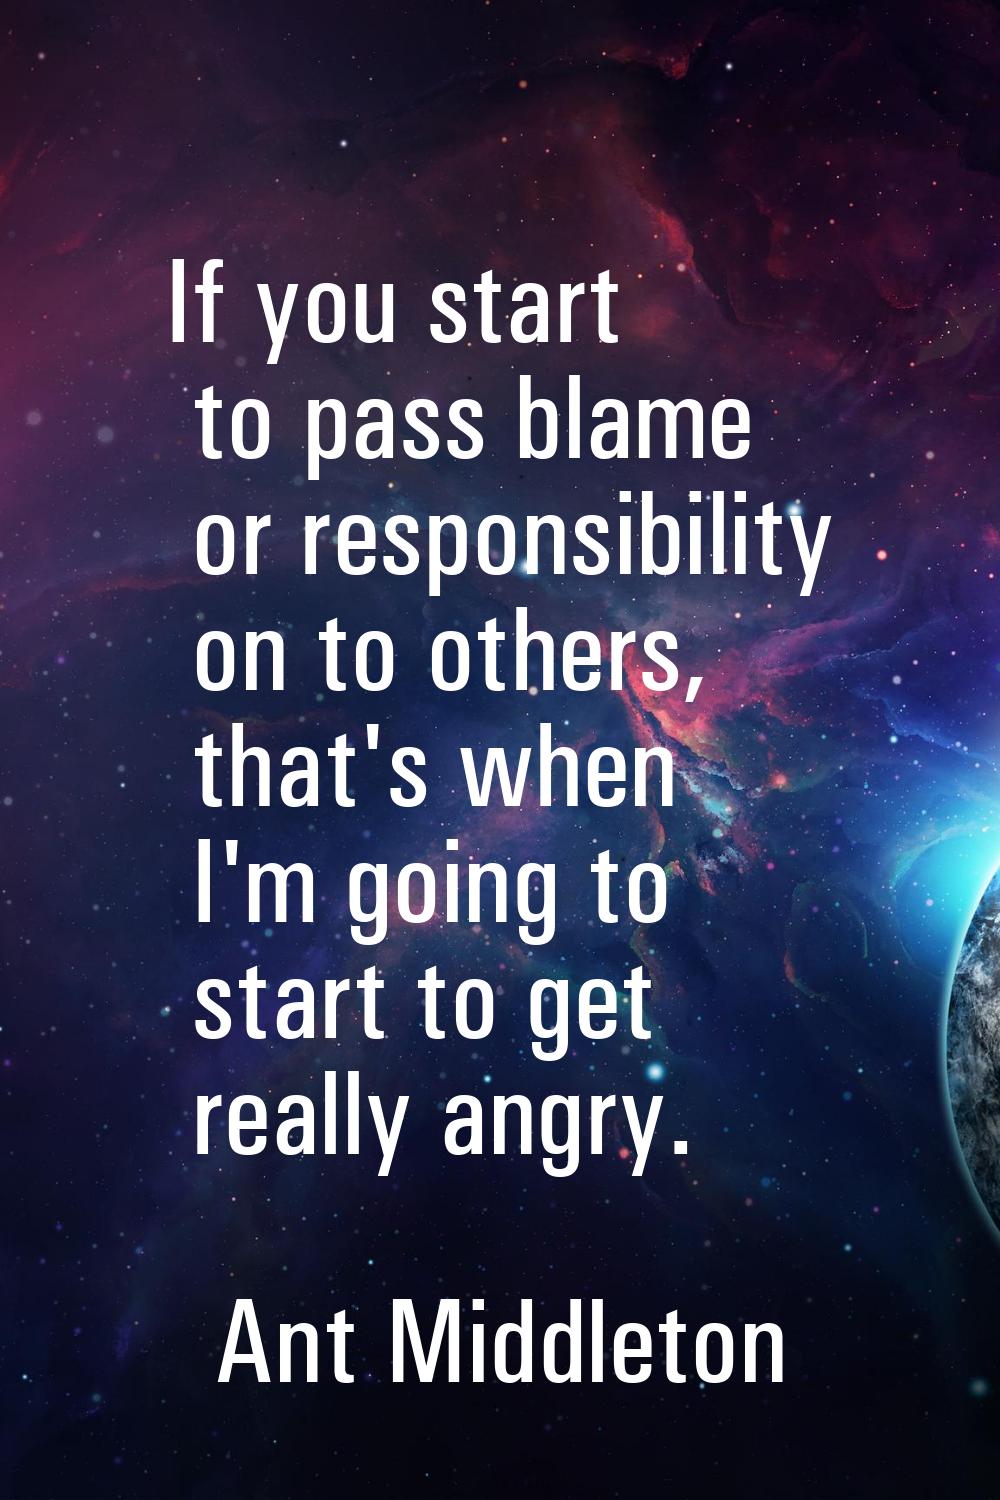 If you start to pass blame or responsibility on to others, that's when I'm going to start to get re